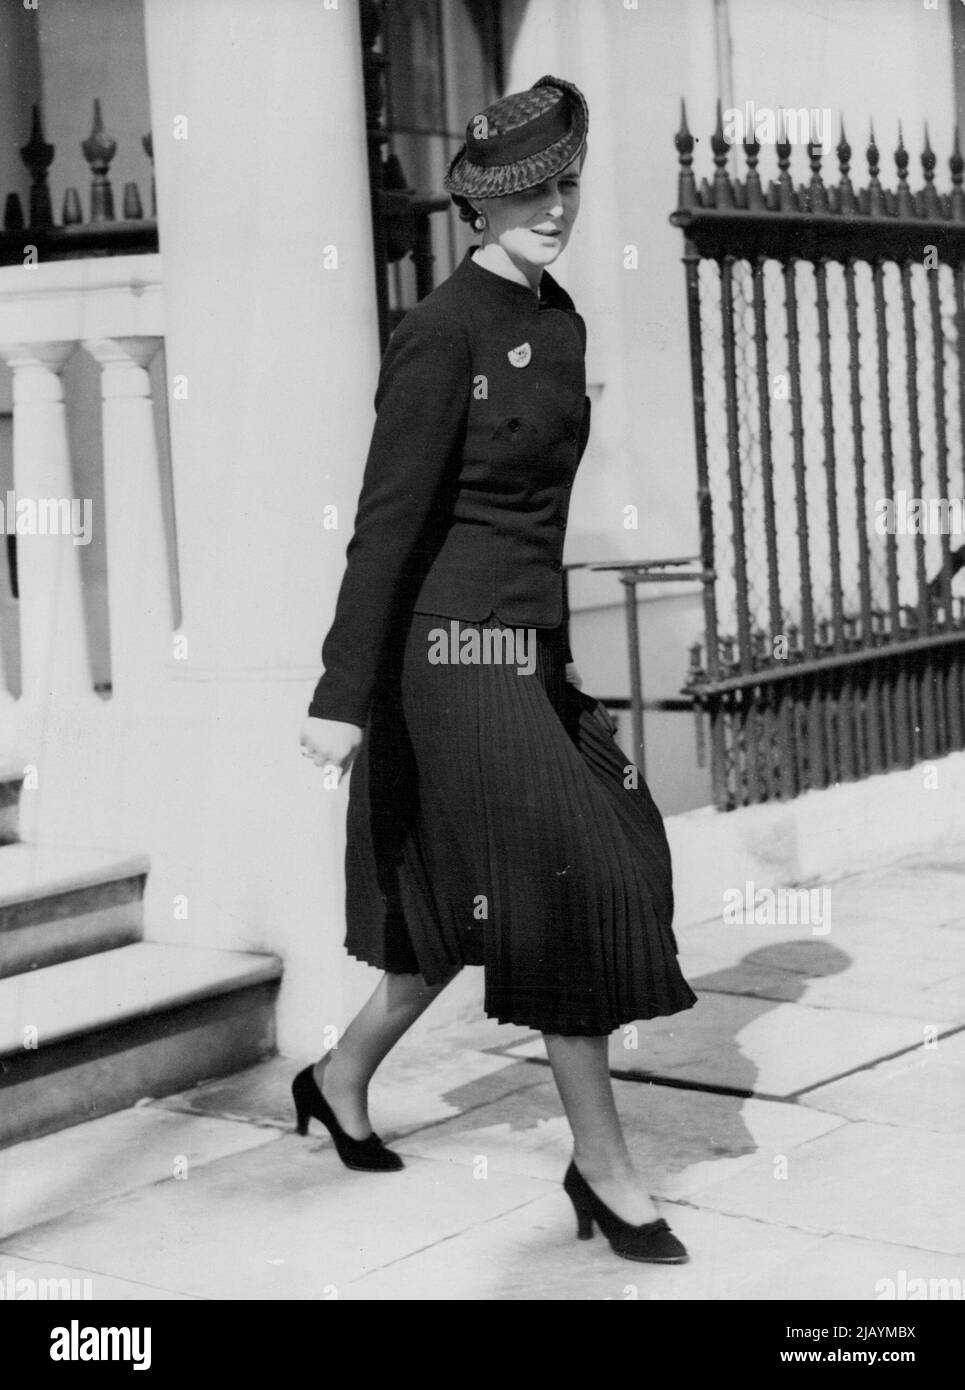 Duchess of Kent Pays Shopping Visit To London -- The Duchess of Kent, wearing a black straw hat and a pleated skirt, leaving her London home at 3, Belgrave Square, to continue her shopping expedition. The Duchess of Kant paid a brief visit to London for shopping and then returned to The Coppins , Iver, Buckinghamshire, to rejoin the Duke and the children. September 19, 1938. Stock Photo